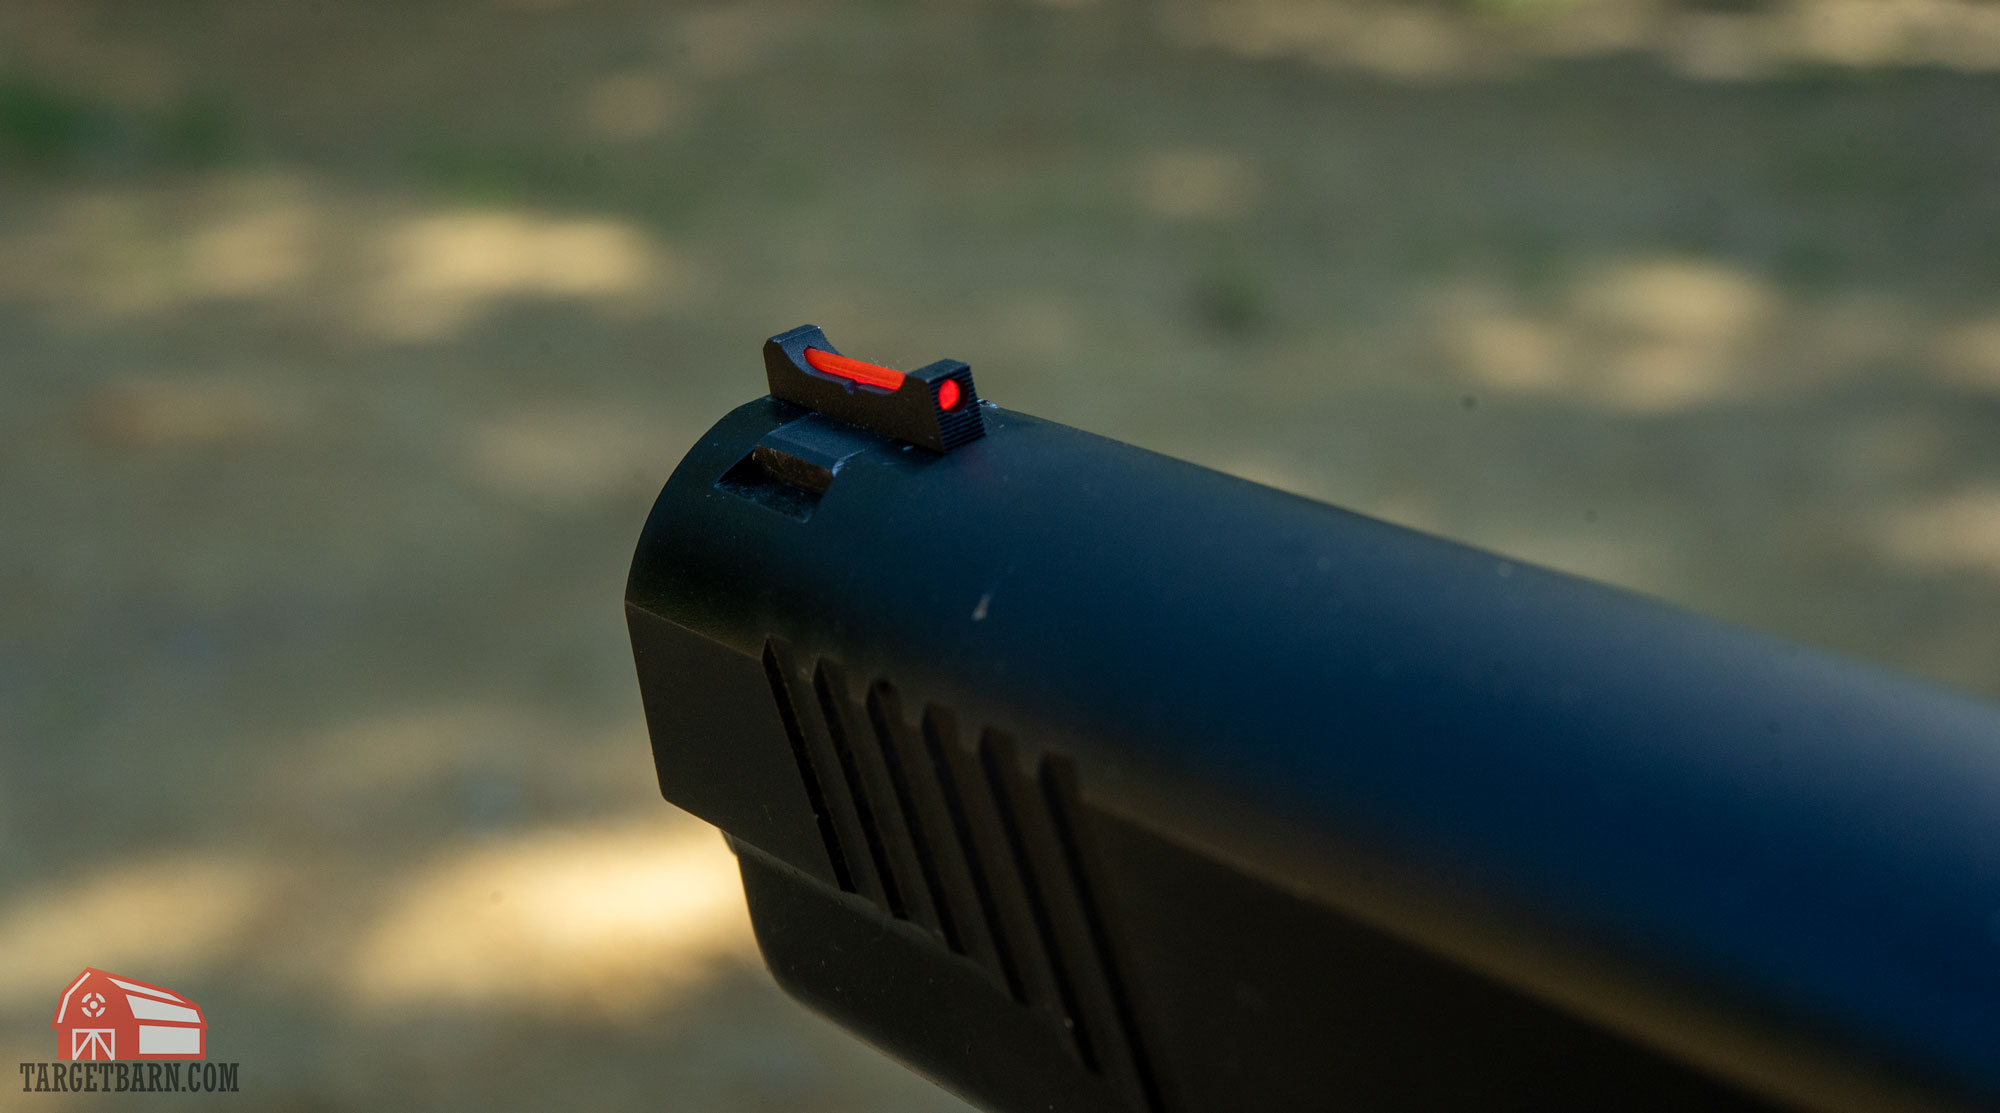 What's The Best Color For Gun Sights?